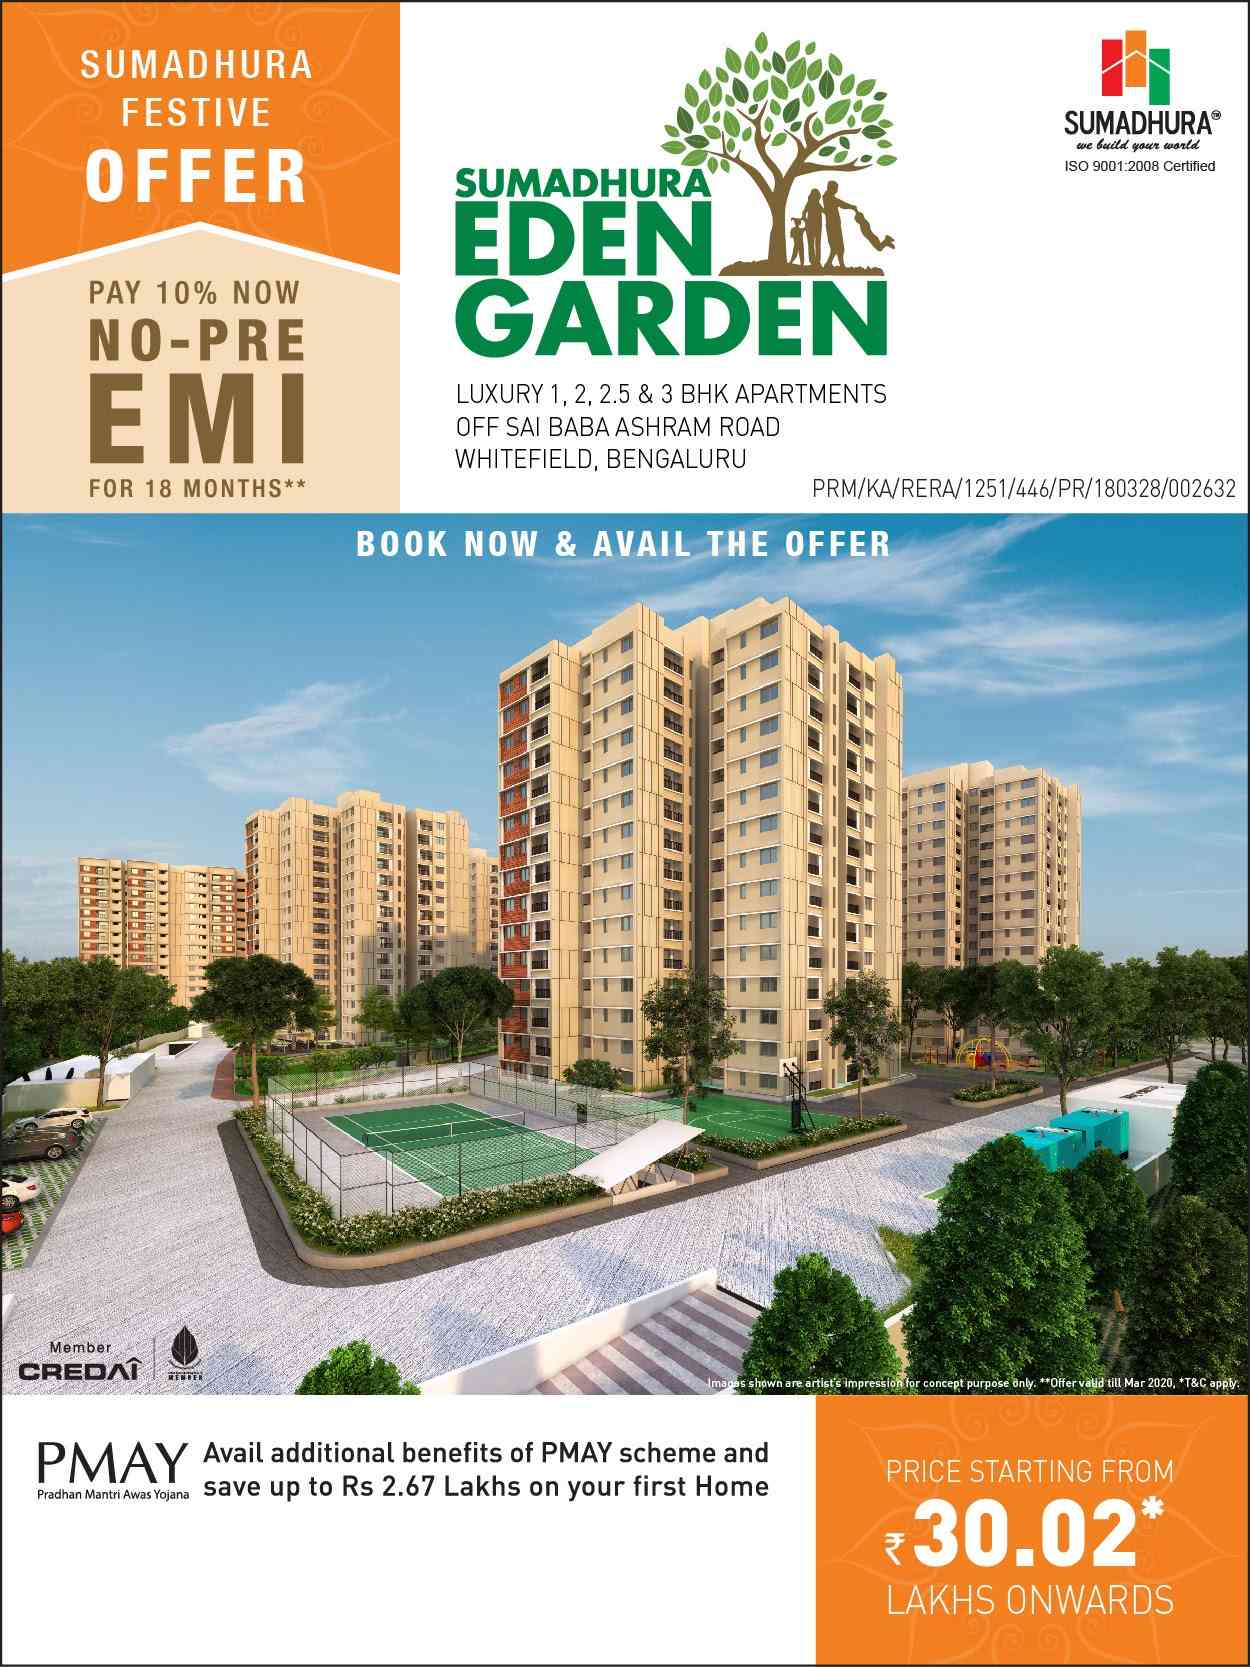 Pay 10% now and no pre-EMI for 18 months at Sumadhura Eden Garden in Bangalore Update